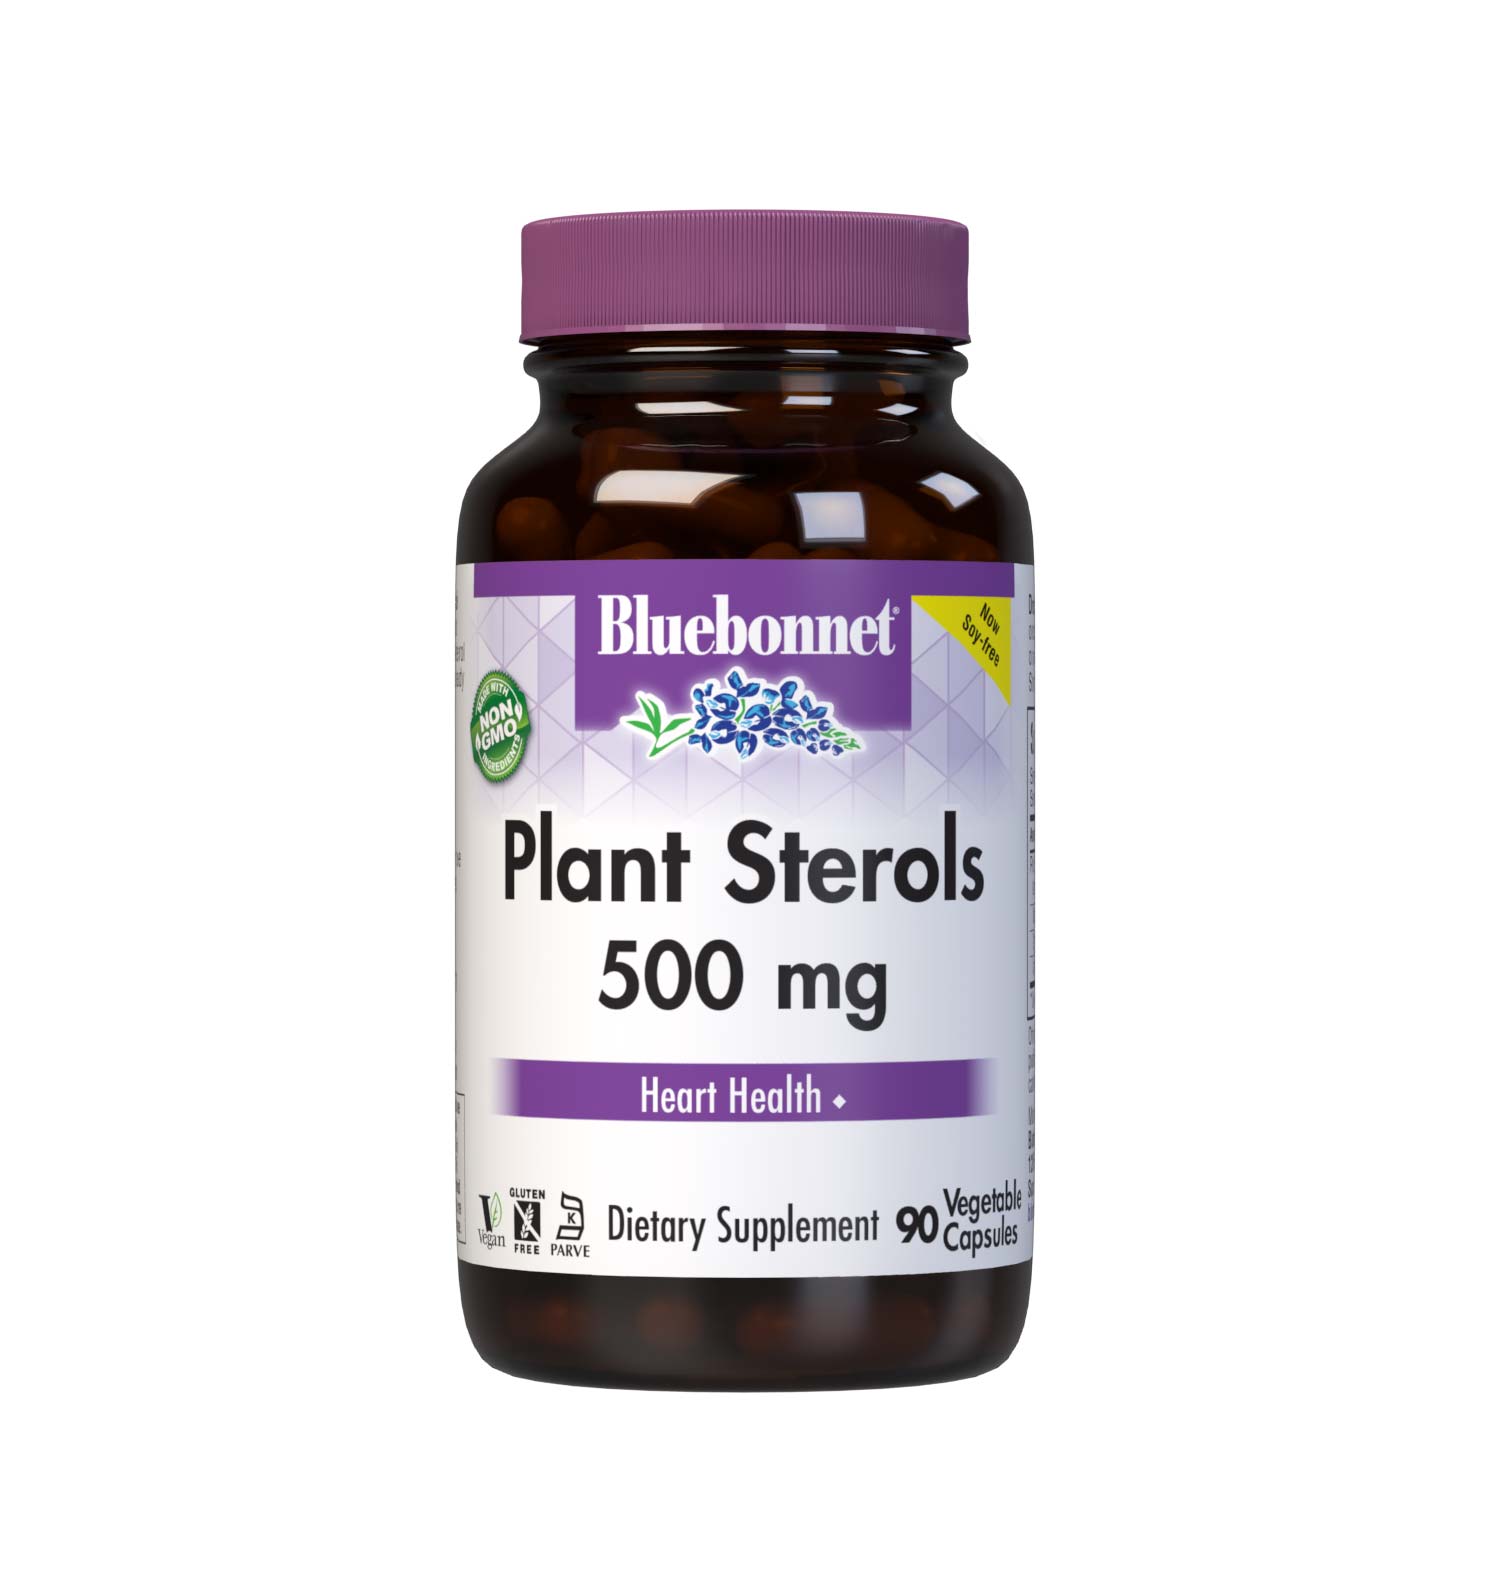 Bluebonnet’s Plant Sterols 500 mg 90 Vegetable Capsules are formulated with non-GMO plant sterols from sunflower oil to help limit cholesterol absorption, helping to support cholesterol levels already within the normal range. #size_90 count